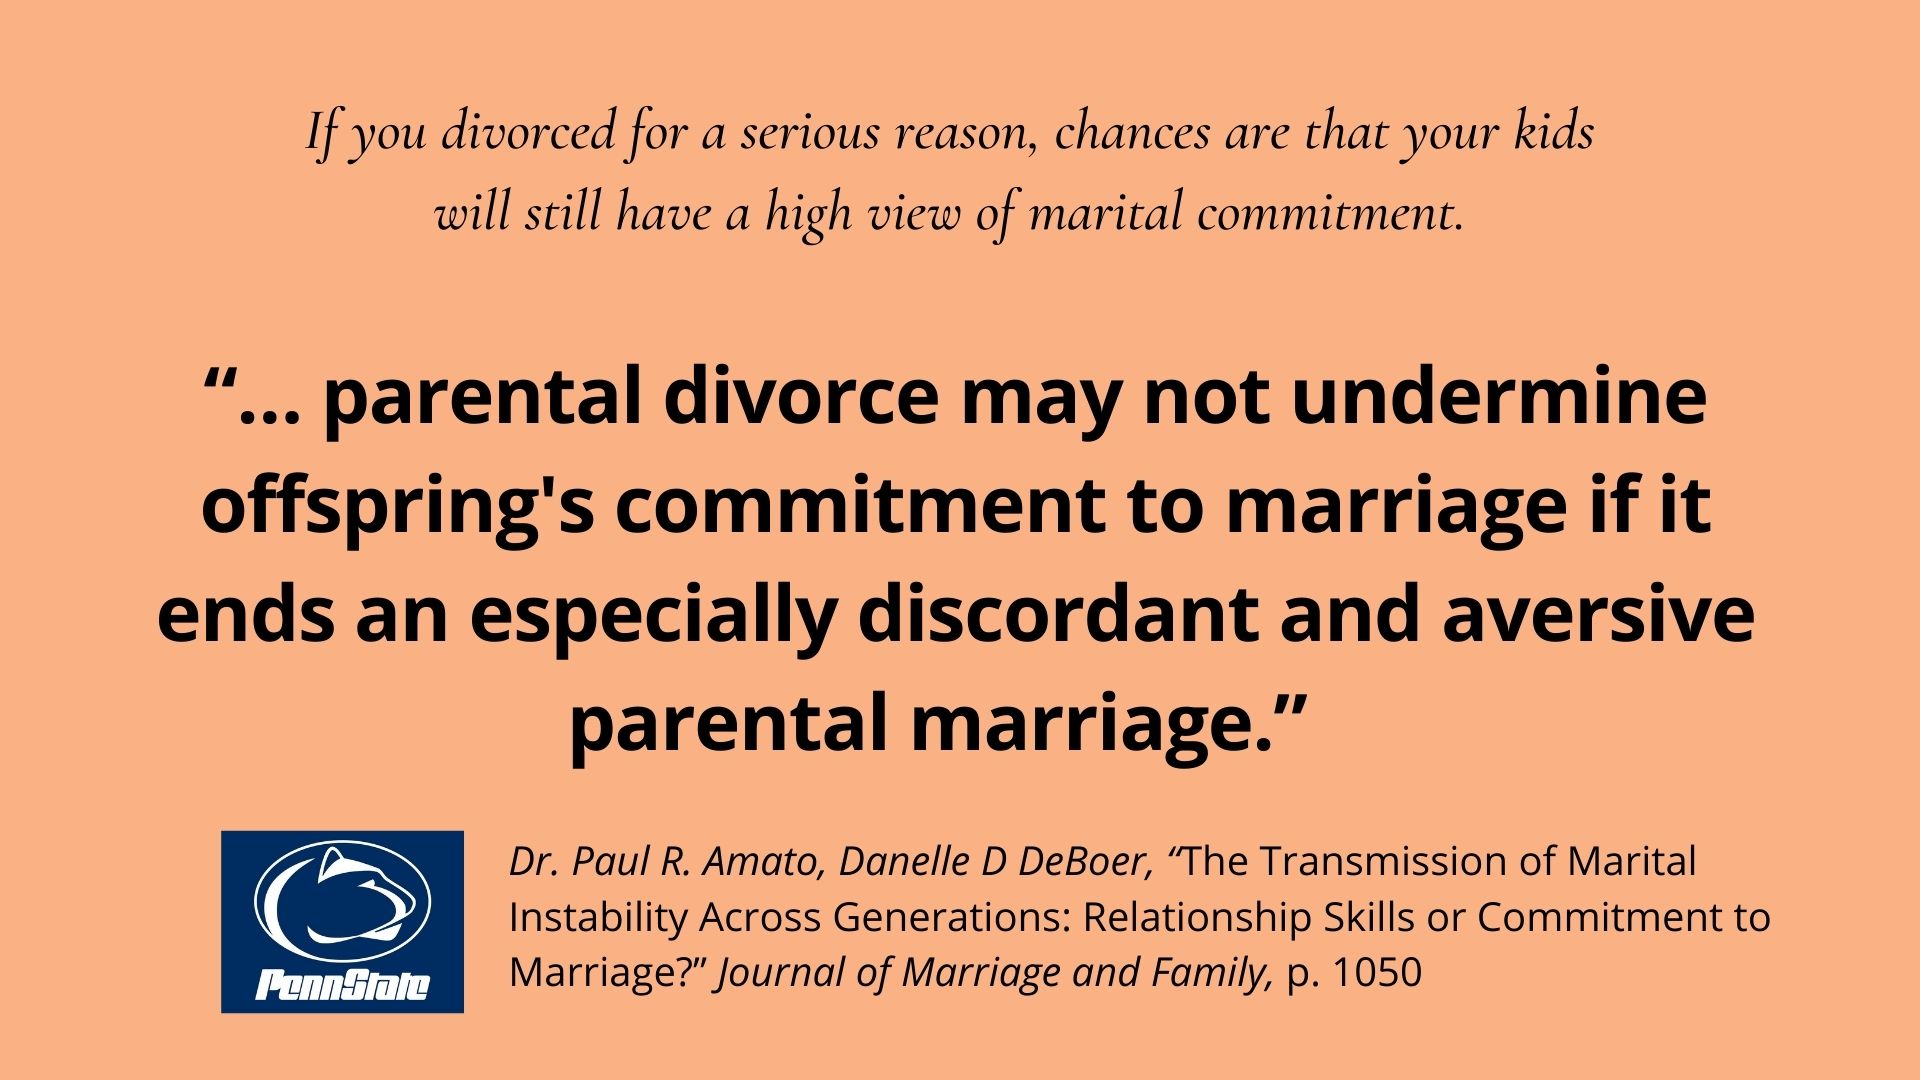 “… parental divorce may not undermine offspring's commitment to marriage if it ends an especially discordant and aversive parental marriage.”